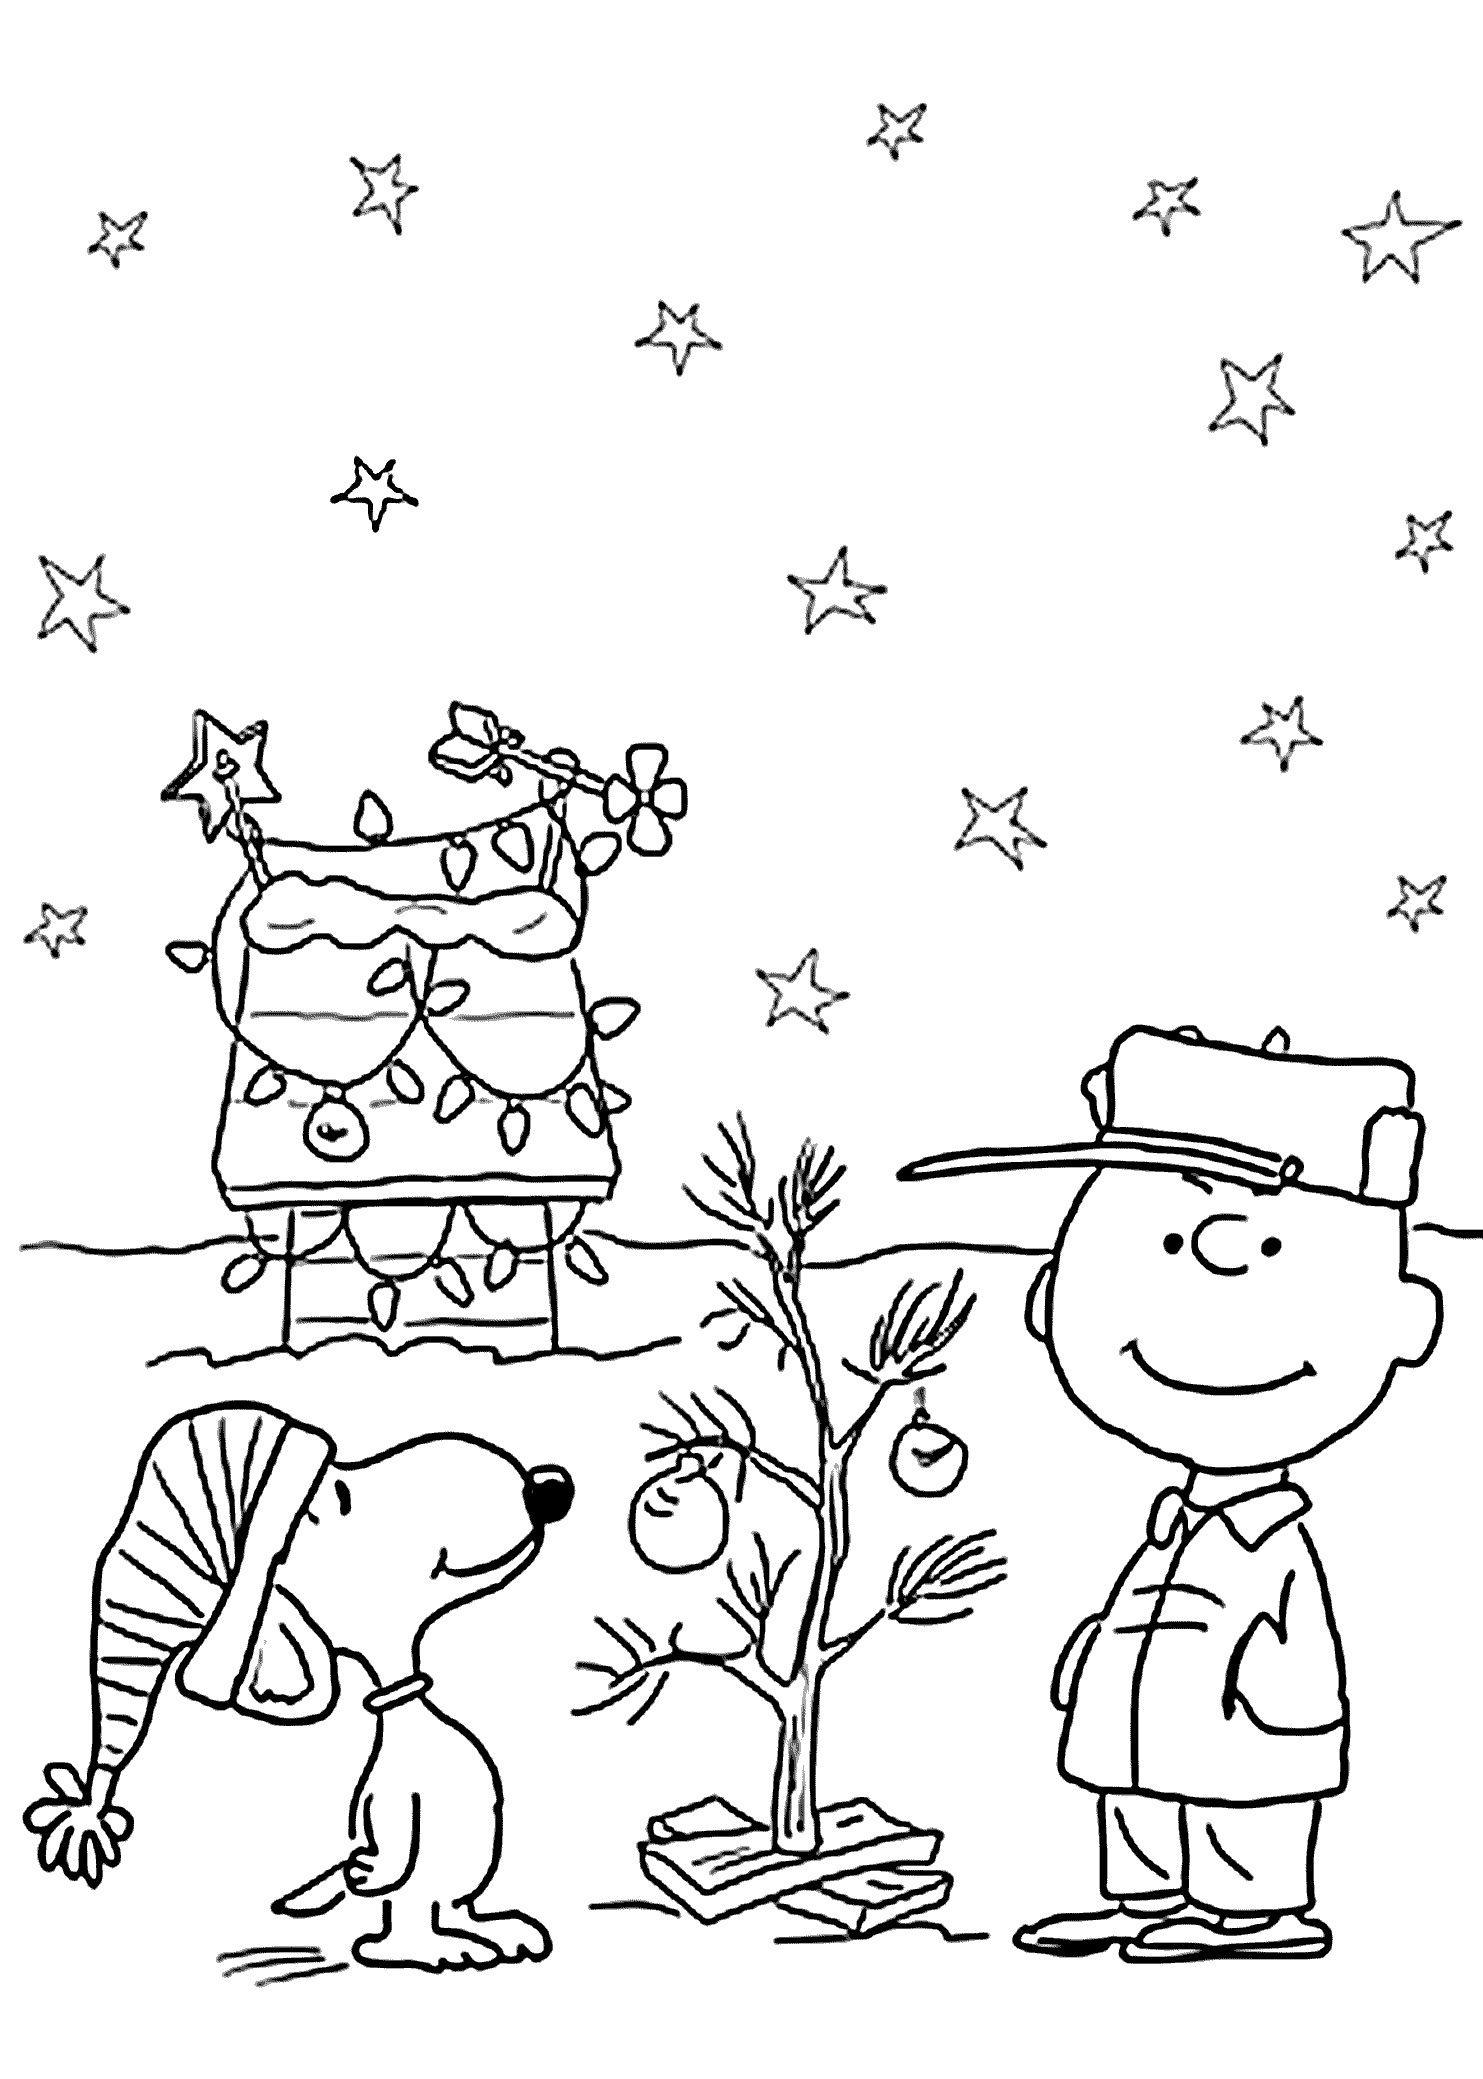 Coloring Pages For Christmas Free Printable
 Charlie Brown and Christmas coloring pages for kids